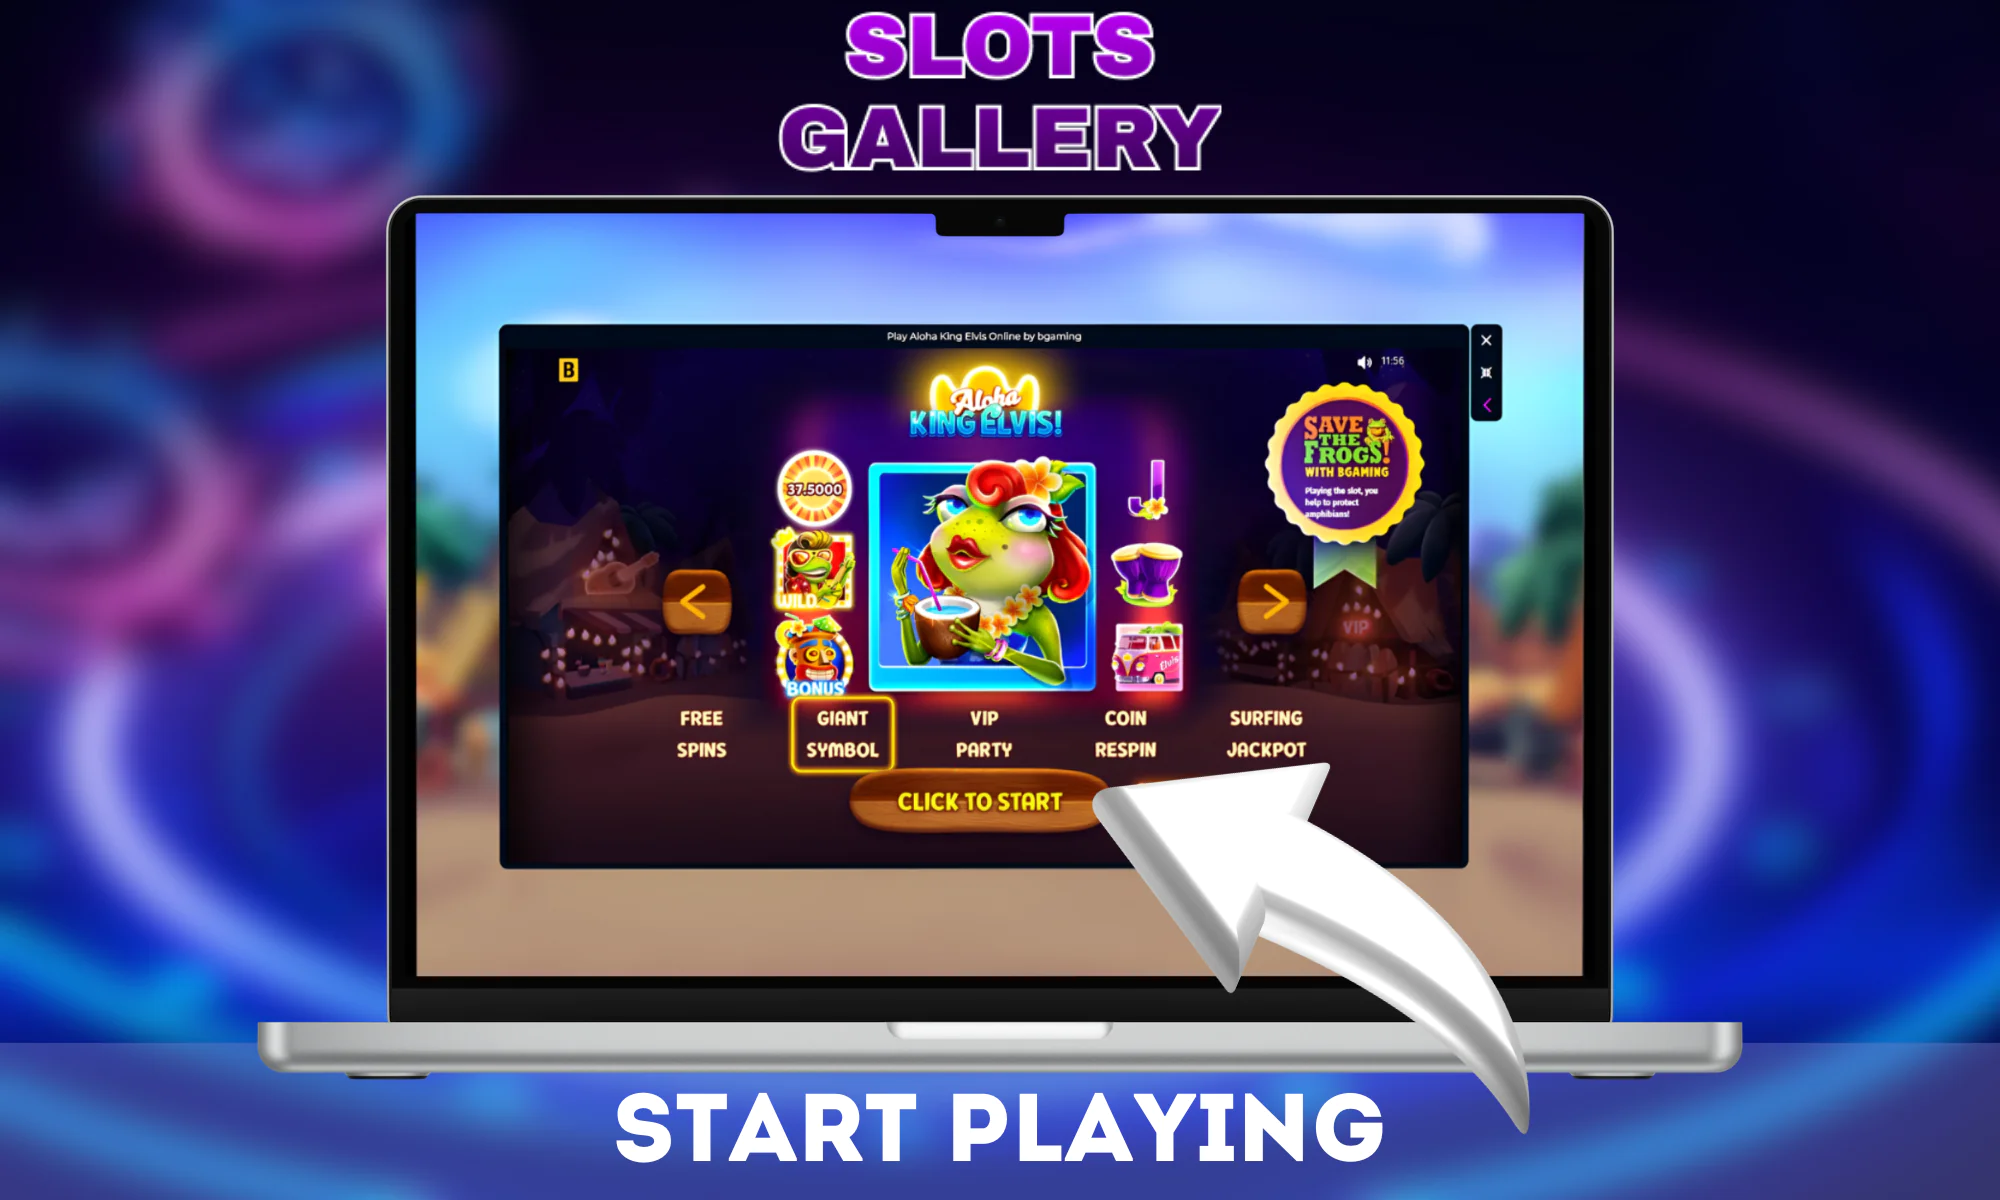 Choose a game from the Slotsgallery and start playing